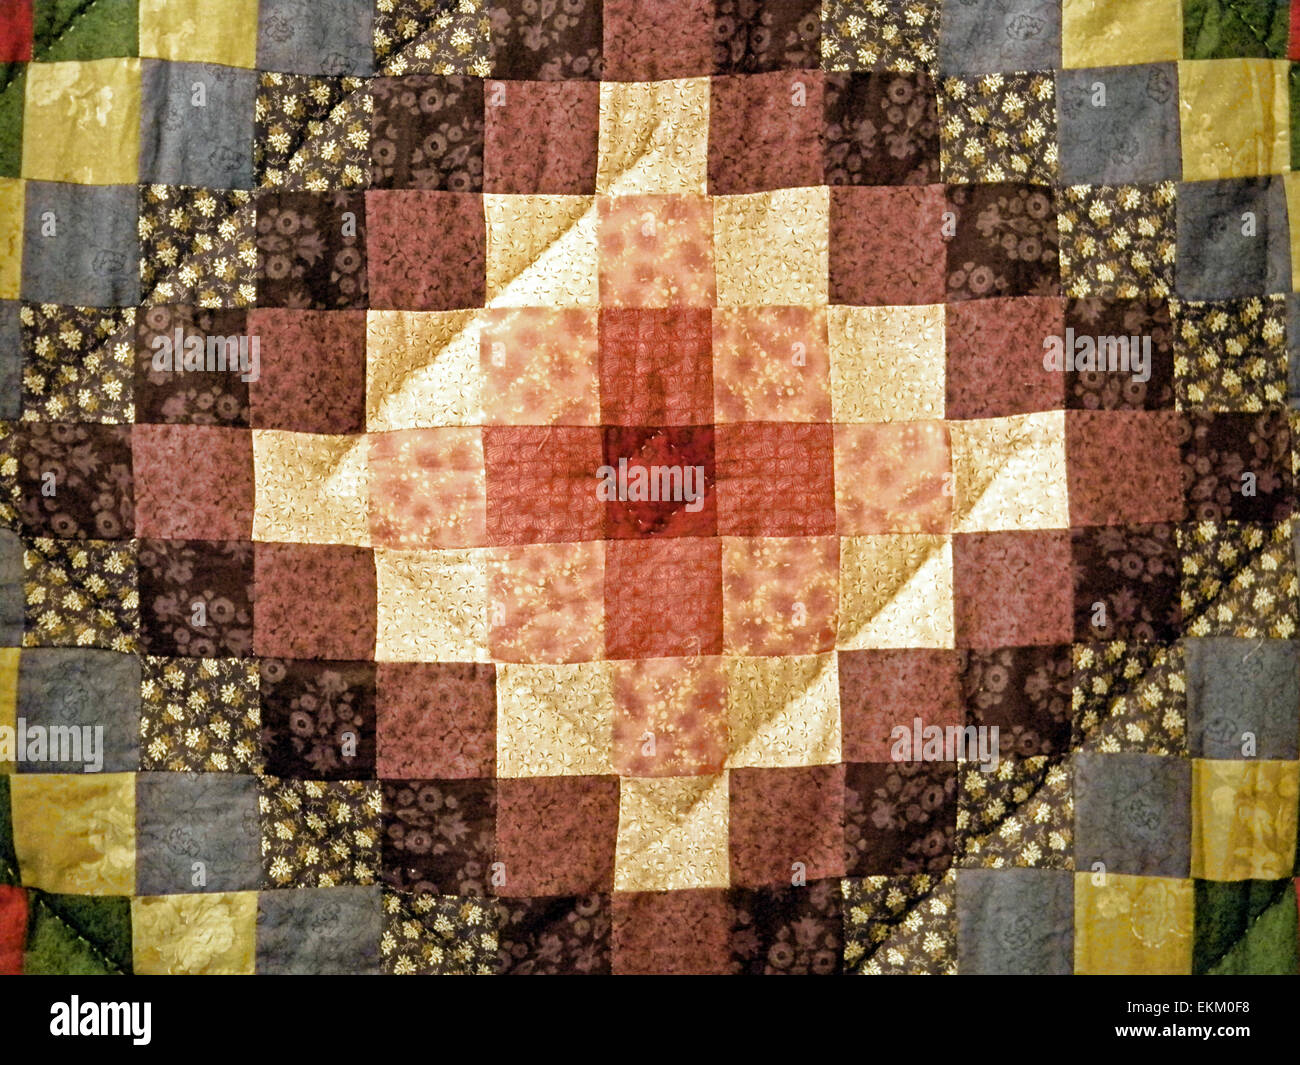 Close up of a brown calico handmade quilt. Stock Photo